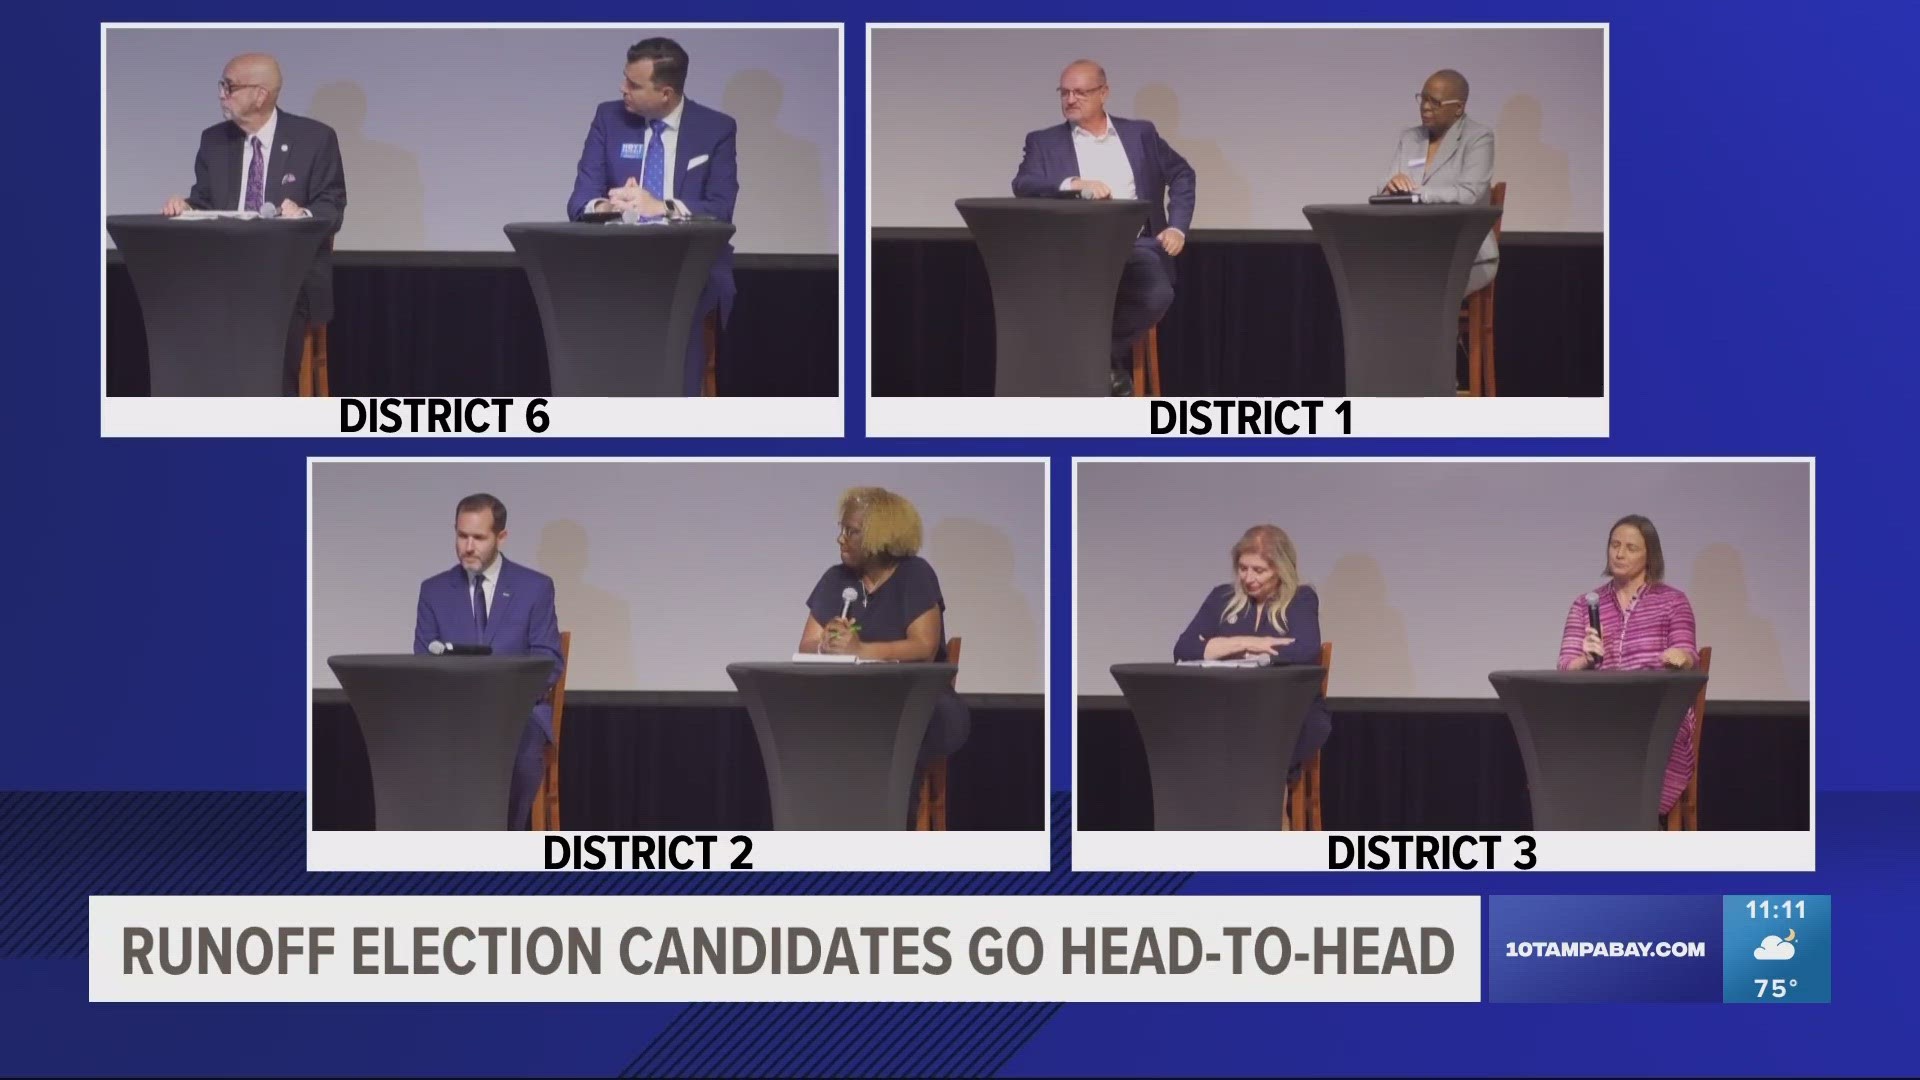 Candidates were able to hear from the millennial demographic, the business community, and Tampa voters.